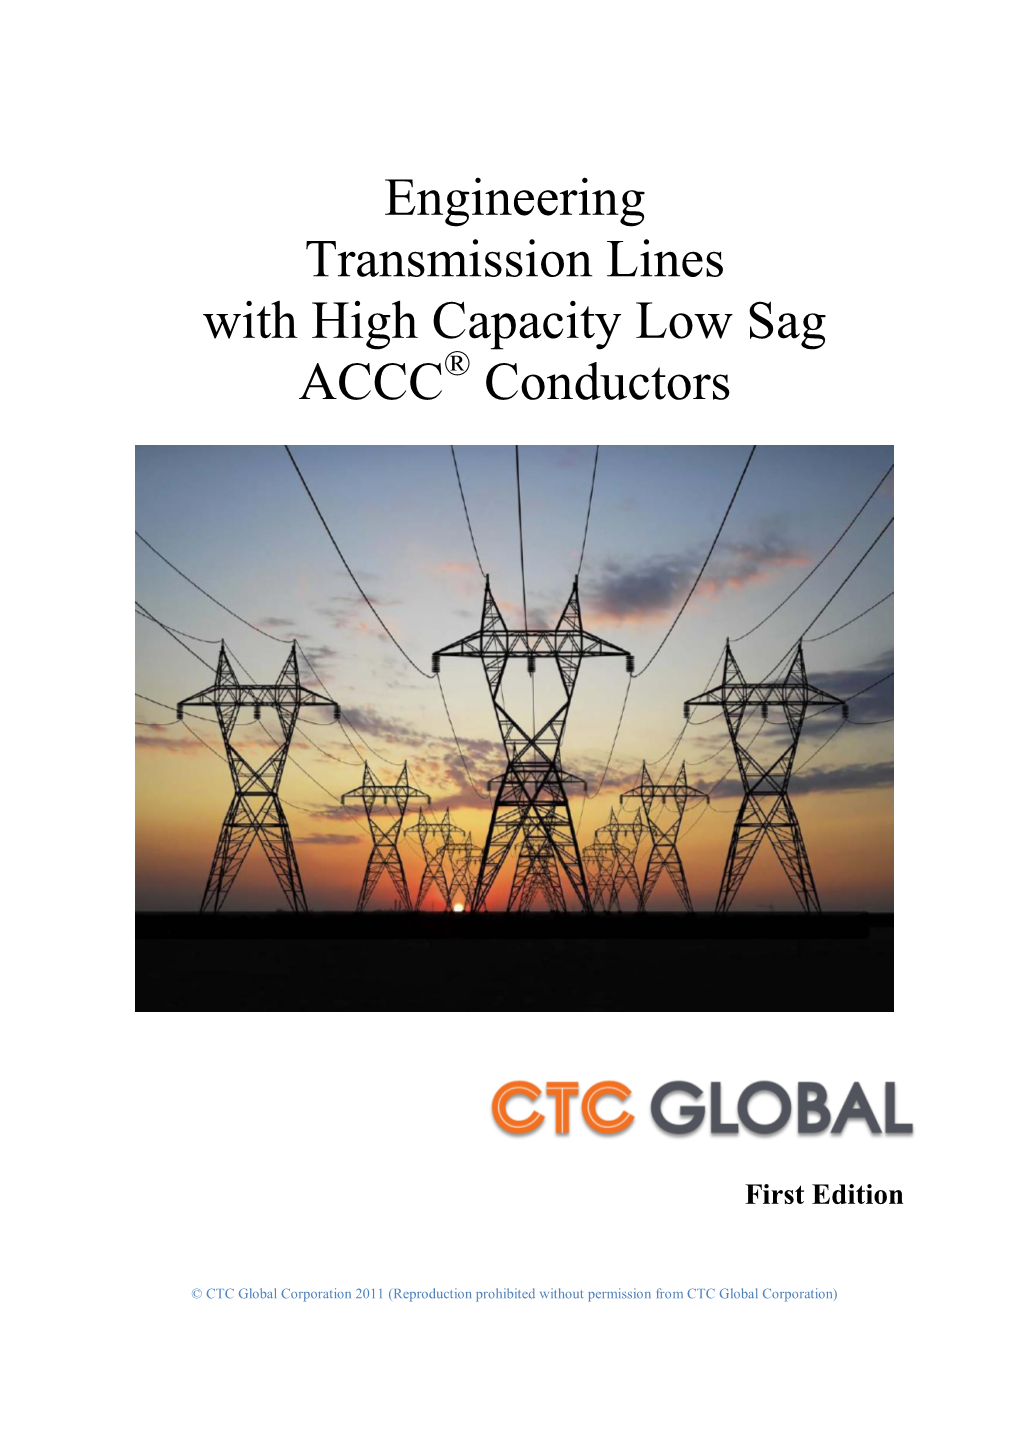 Engineering Transmission Lines with High Capacity Low Sag ACCC® Conductors